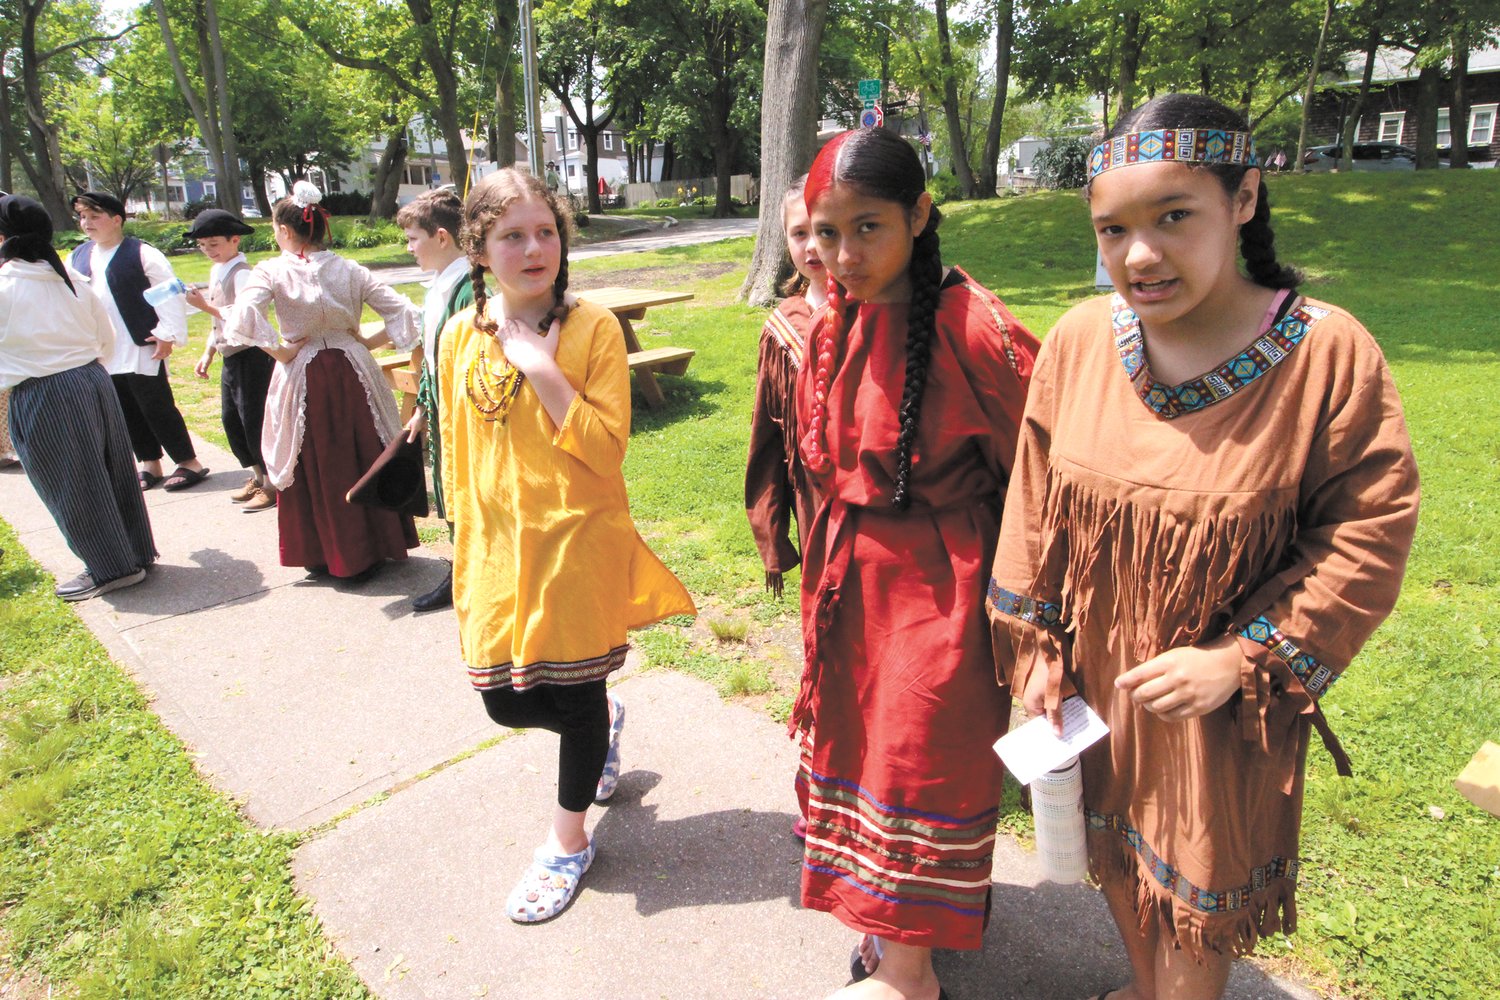 PORTRAYING NATIVE AMERICANS: Fifth grade students from Wyman School dressed as Native Americans for Saturday’s waling tour of Pawtuxet.